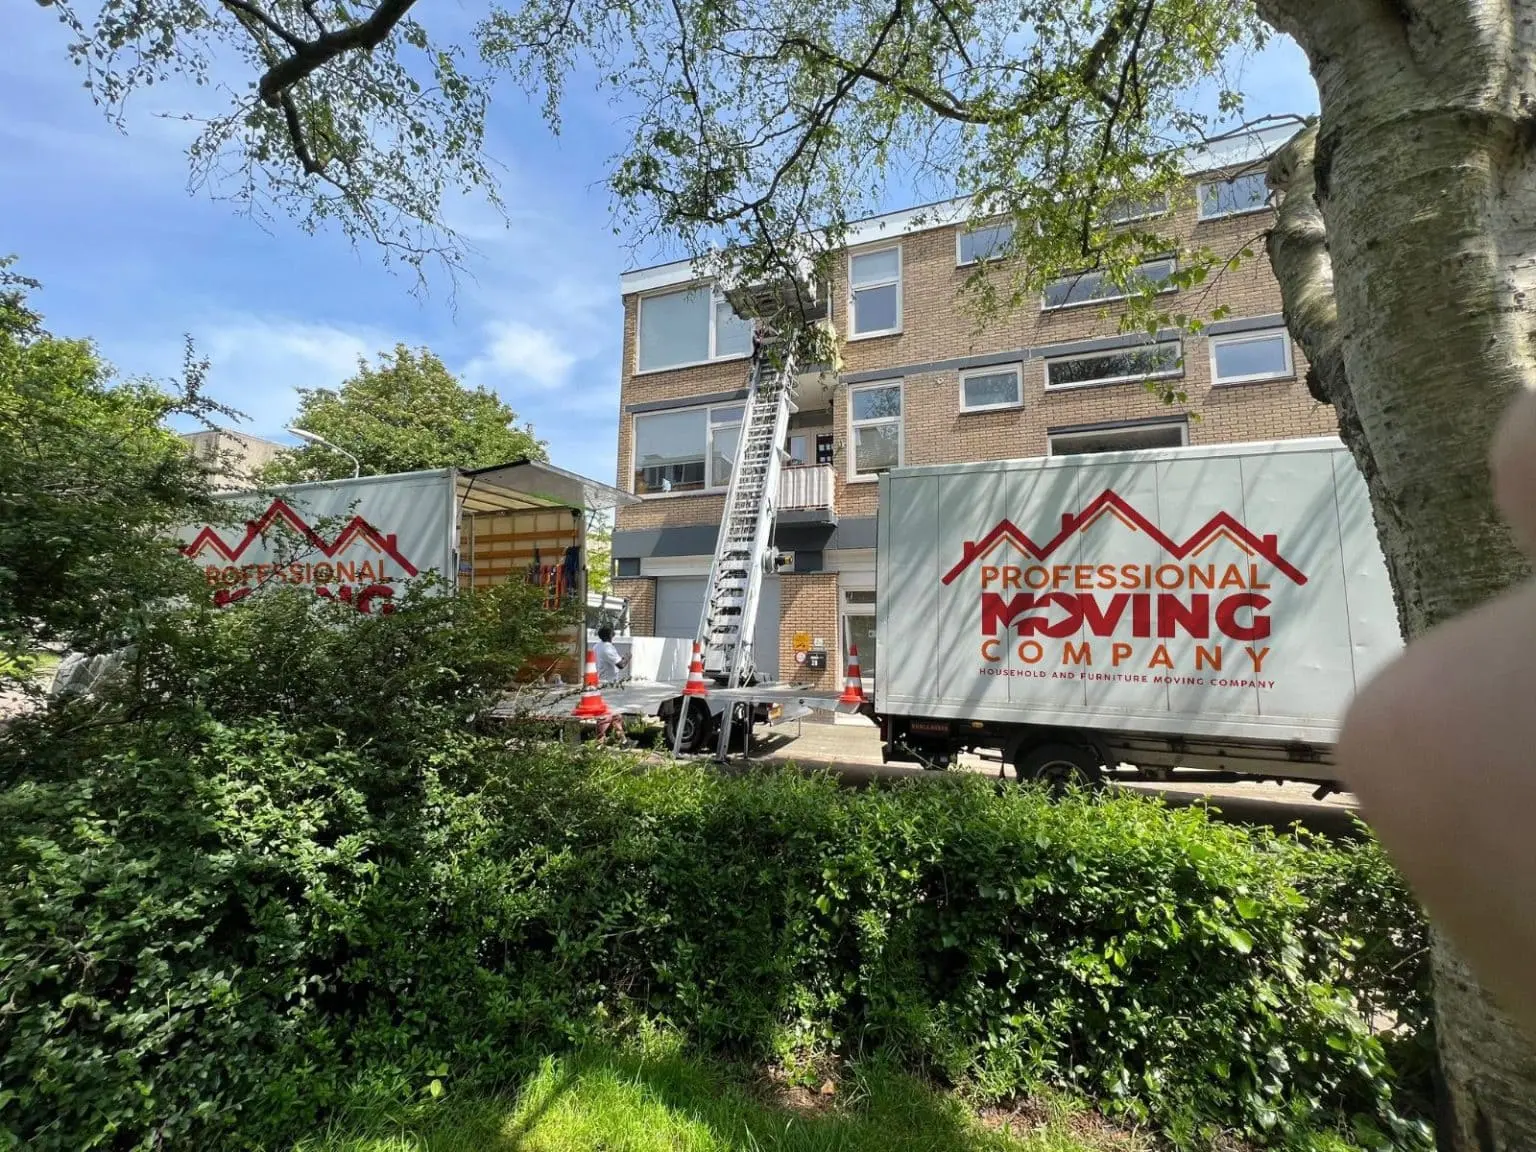 Moving Company Waddinxveen | How We Serve Private Moving Service